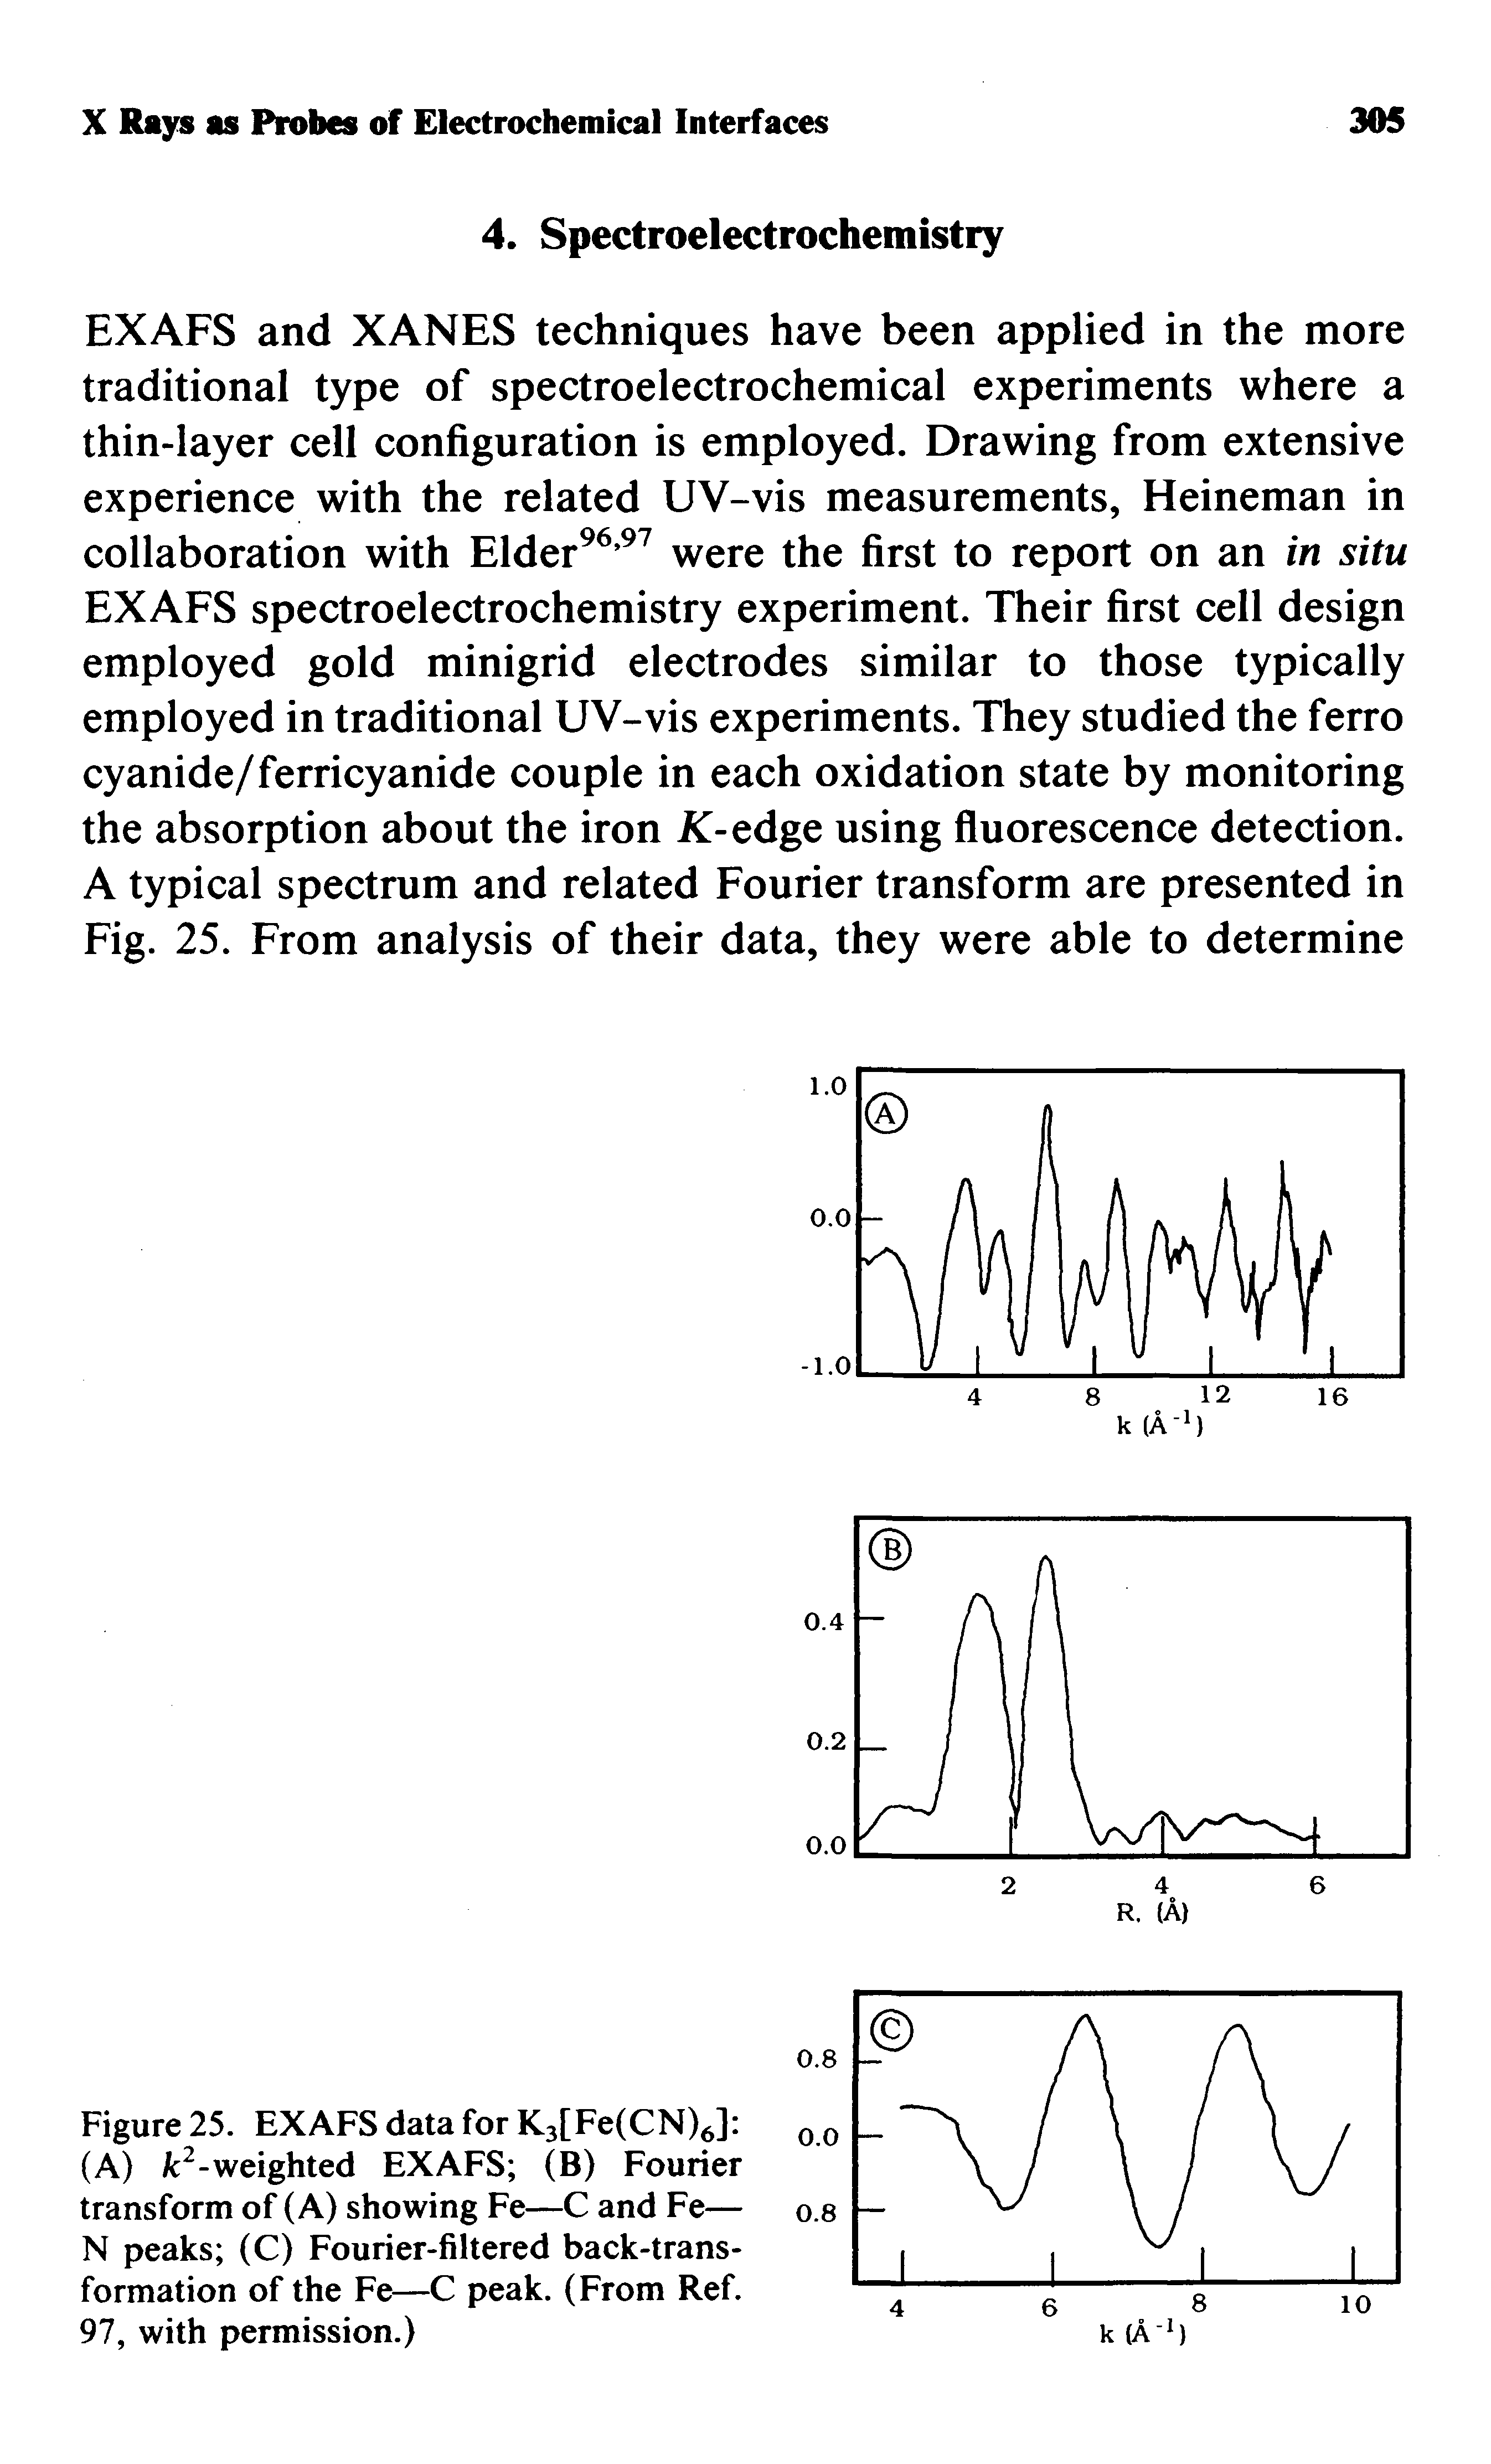 Figure 25. EXAFS data for K3[Fe(CN)6] (A) k2-weighted EXAFS (B) Fourier transform of (A) showing Fe—C and Fe— N peaks (C) Fourier-filtered back-transformation of the Fe—C peak. (From Ref. 97, with permission.)...